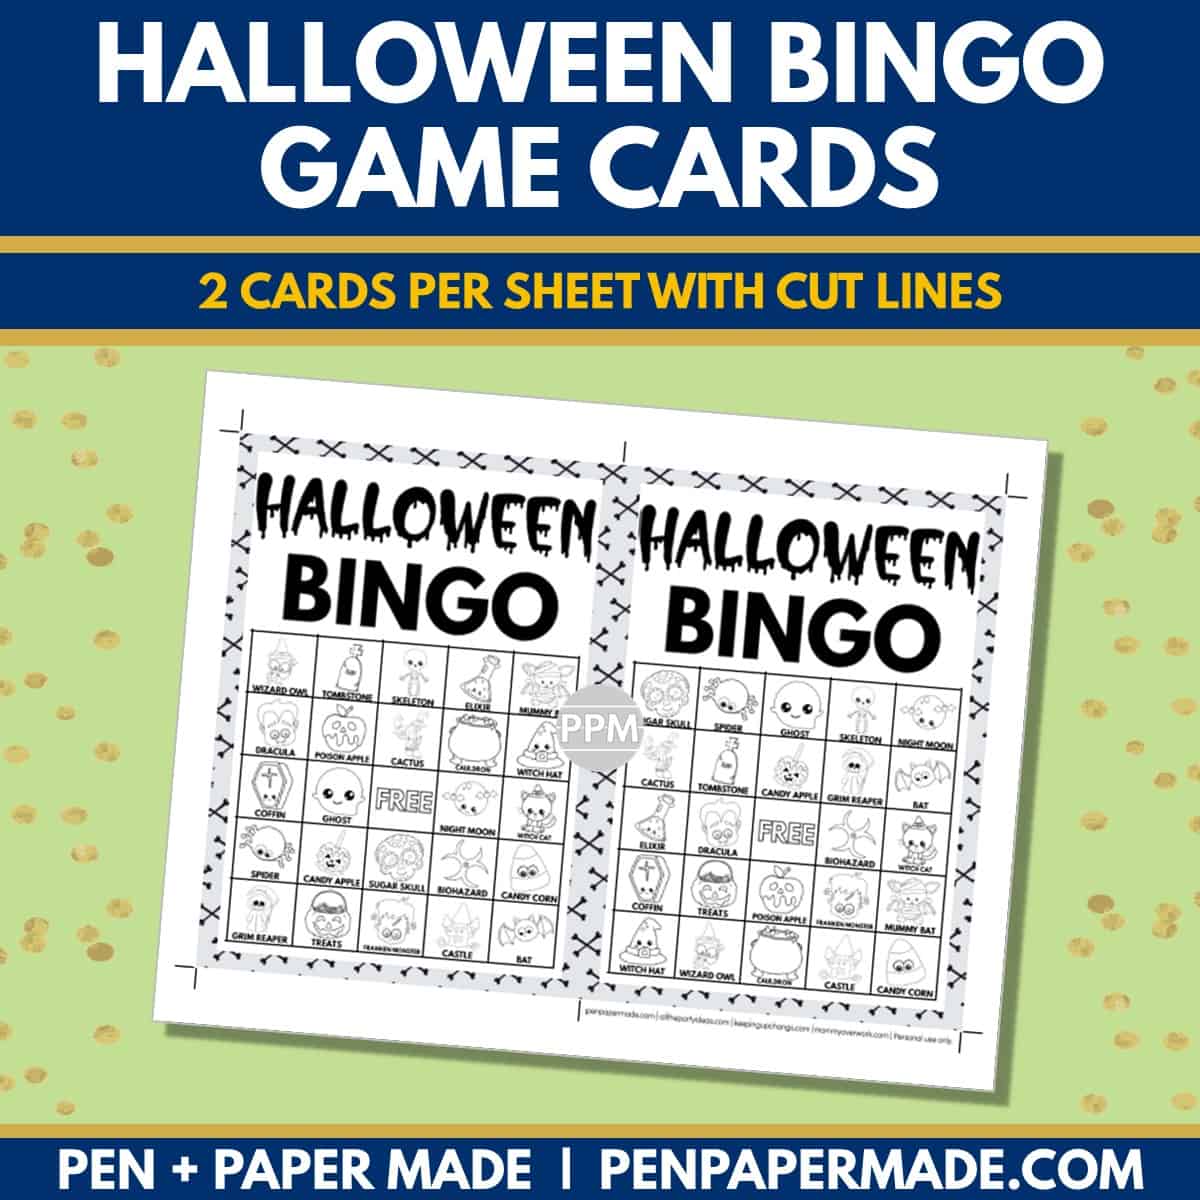 halloween bingo card 5x5 5x7 game boards with black white images and text words for coloring.